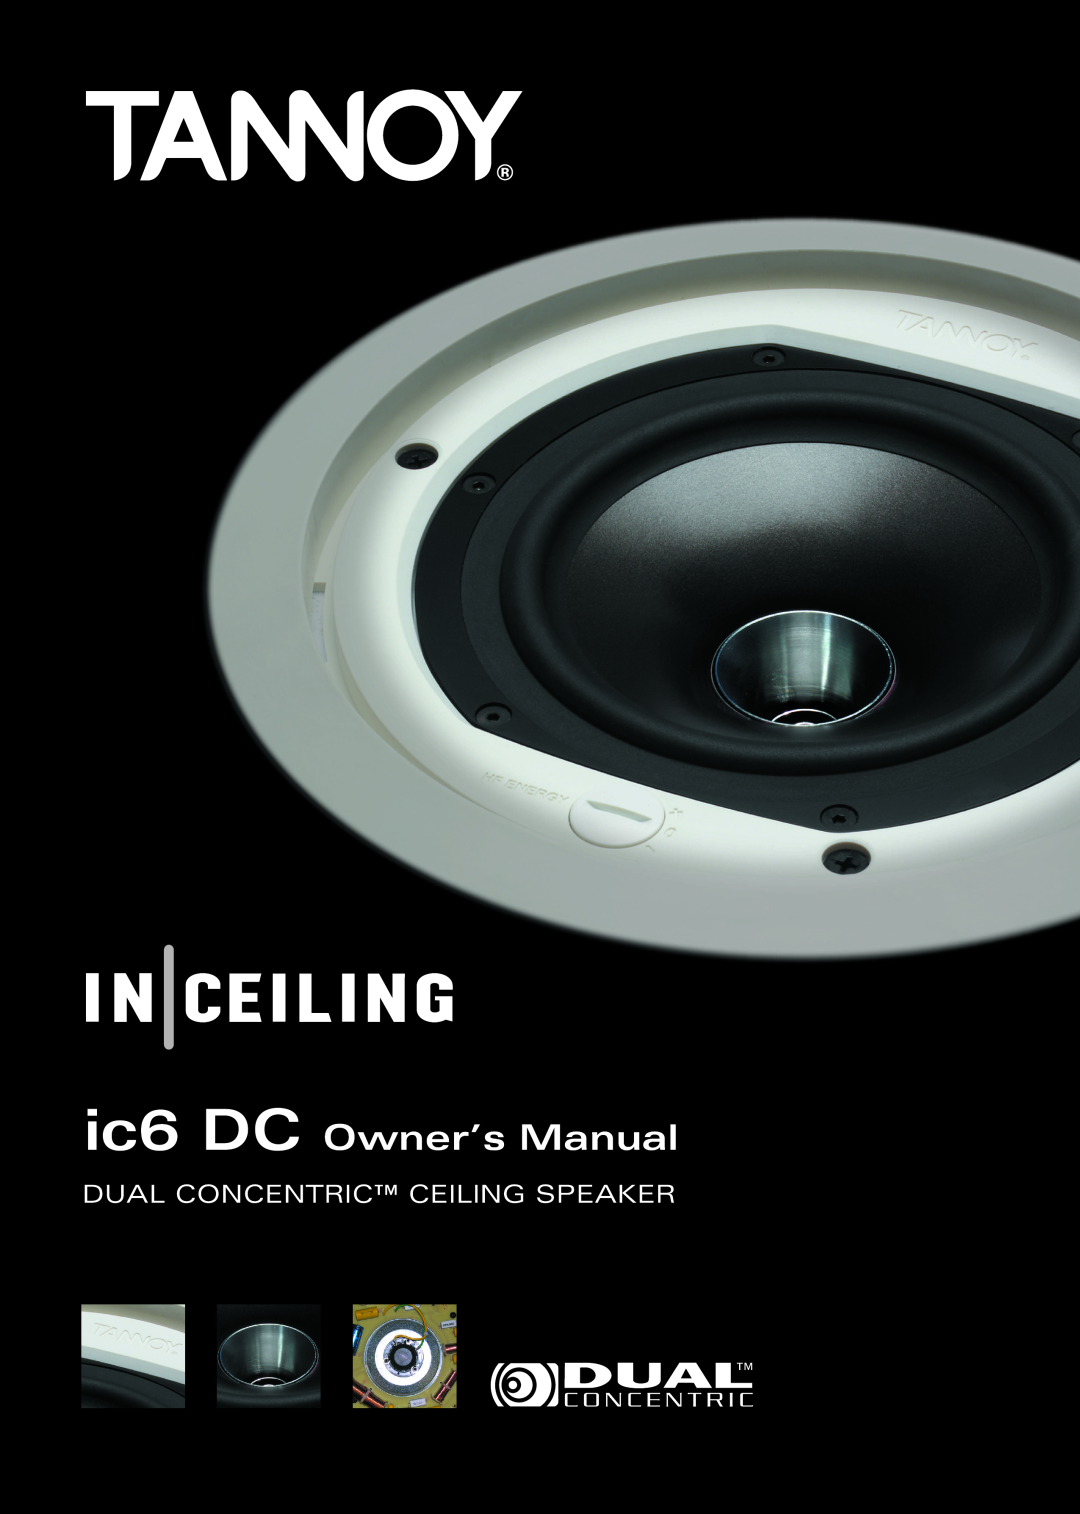 Tannoy owner manual ic6 DC Owner’s Manual, Dual Concentric Ceiling Speaker 